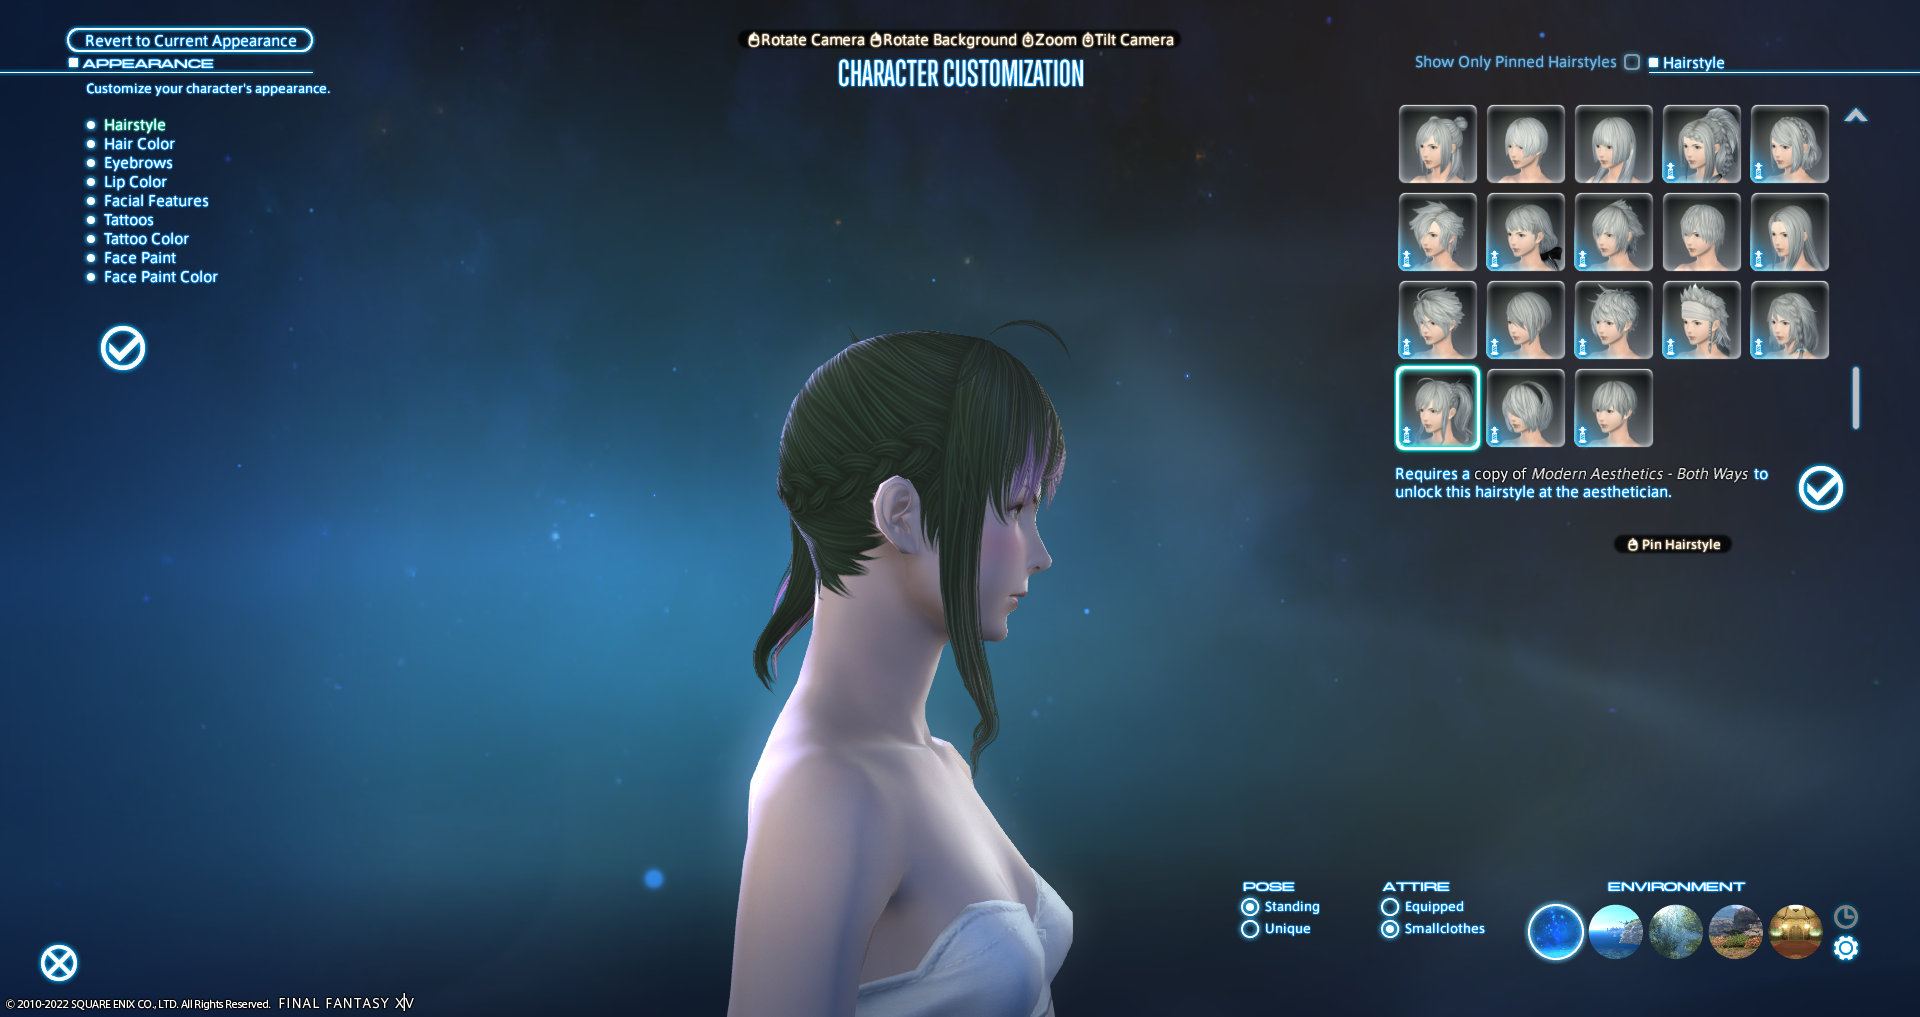 How To Unlock The New Close Shave Hairstyle in FFXIV